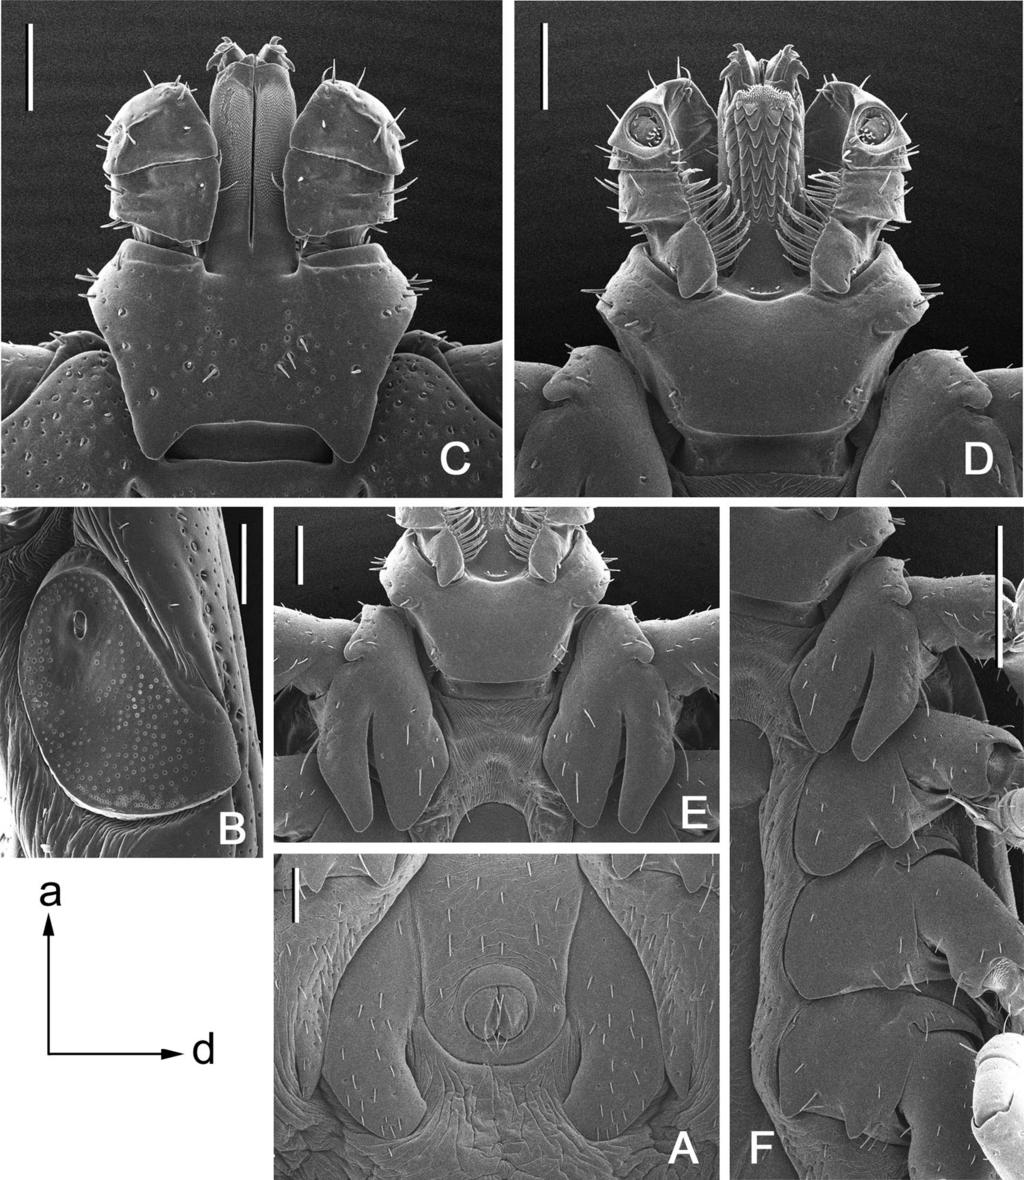 482 JOURNAL OF MEDICAL ENTOMOLOGY Vol. 50, no. 3 Fig. 2. Rhipicephalus congolensis n. sp., male. (A) Anal plates. Bar 0.2 mm. (B) Spiracular plate. Bar 0.2 mm. Arrows indicate orientation of spiracular plate (a anterior; d dorsal).